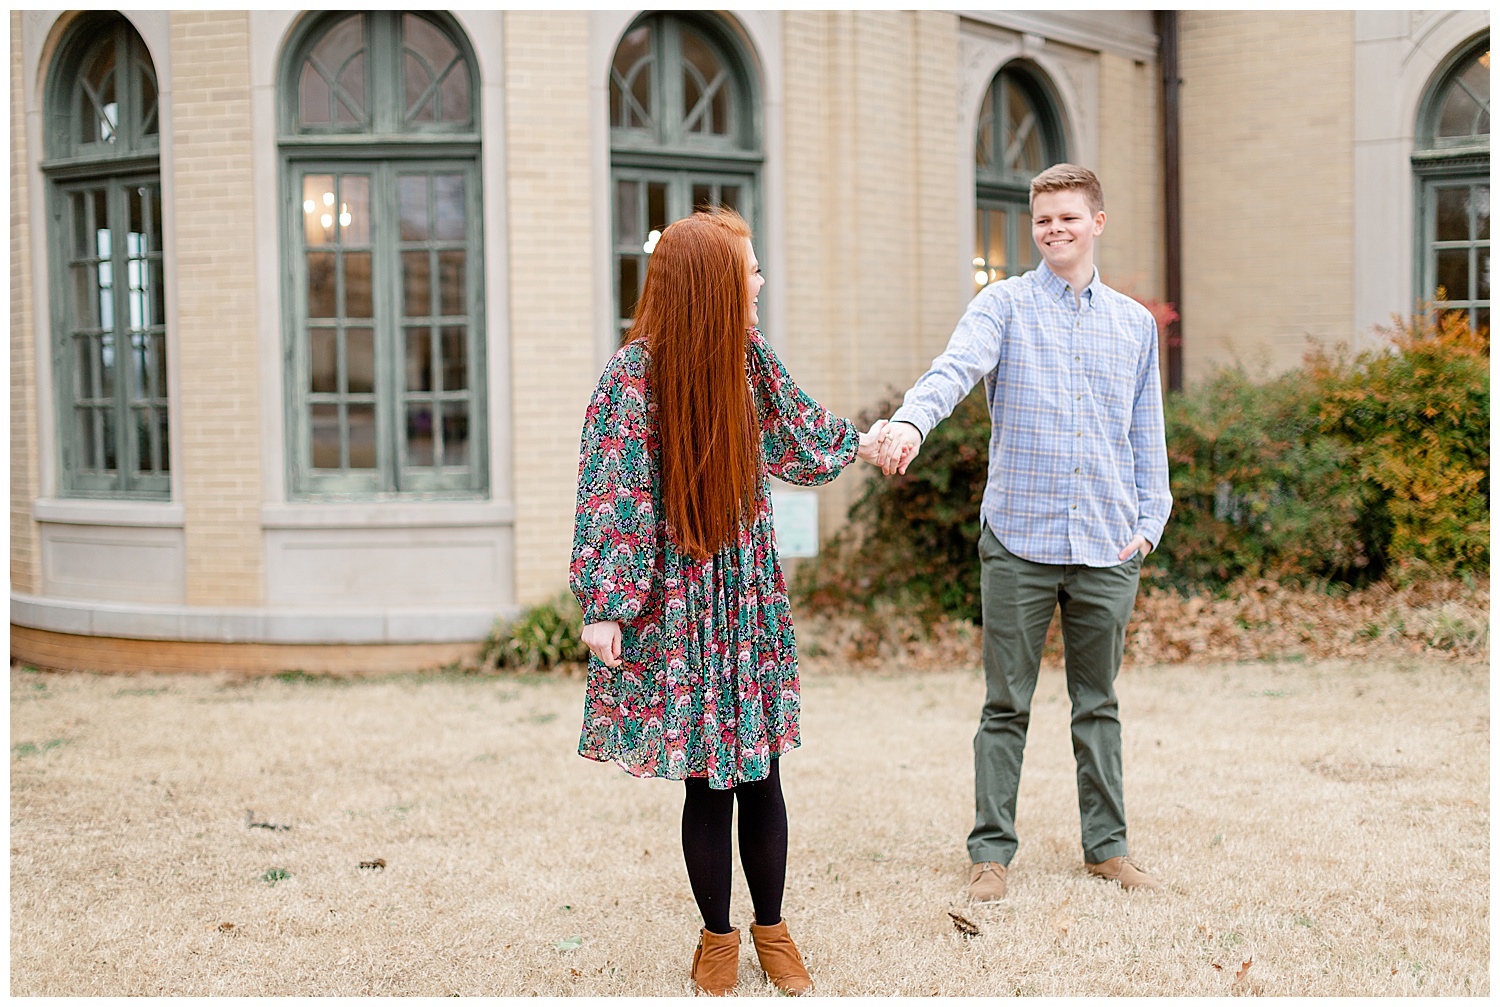 grant and ashley holding hands during their spring engagement session in front of the mansion at woodward park.